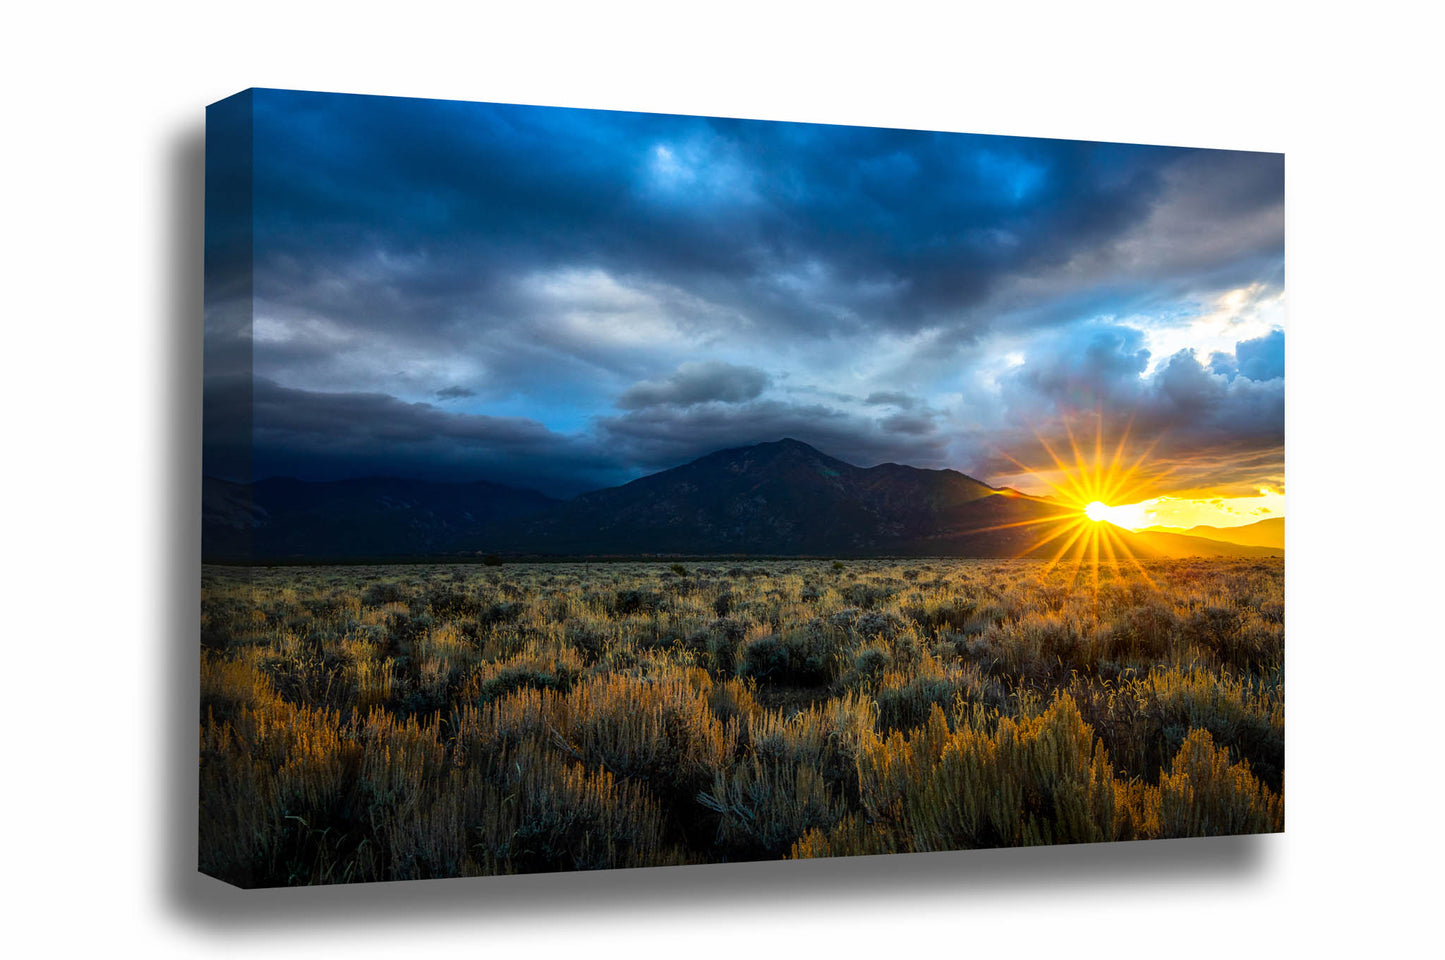 Western canvas wall art of the sun peeking over Taos Mountain and illuminating the sagebrush in the high desert landscape of Taos, New Mexico by Sean Ramsey of Southern Plains Photography.